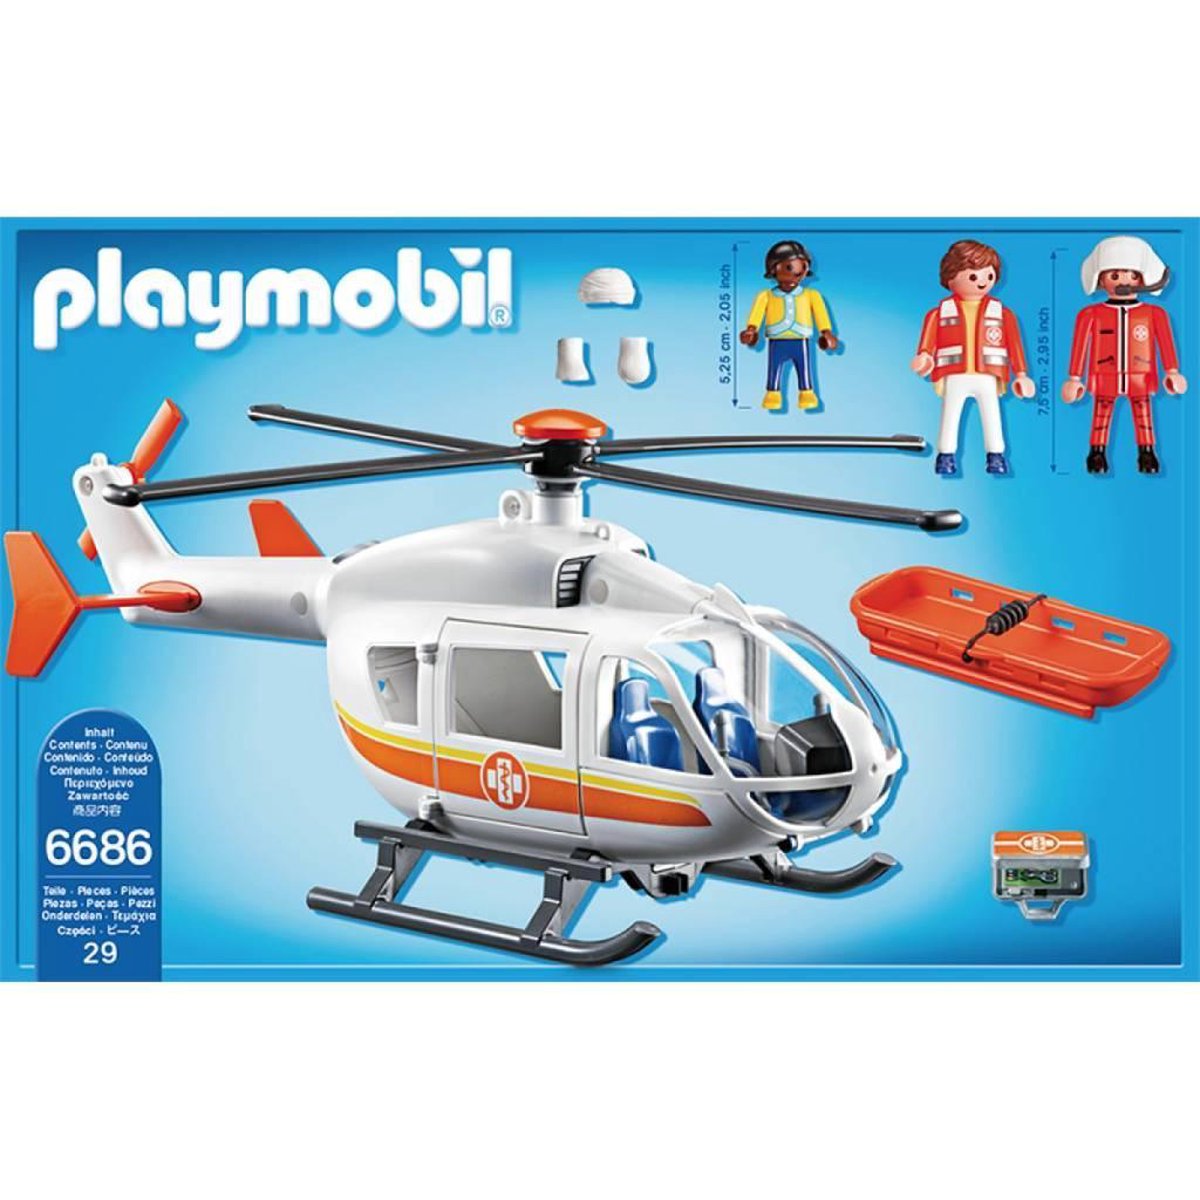 forråde Humanistisk pustes op Playmobil Traumahelikopter - 6686 | bol.com